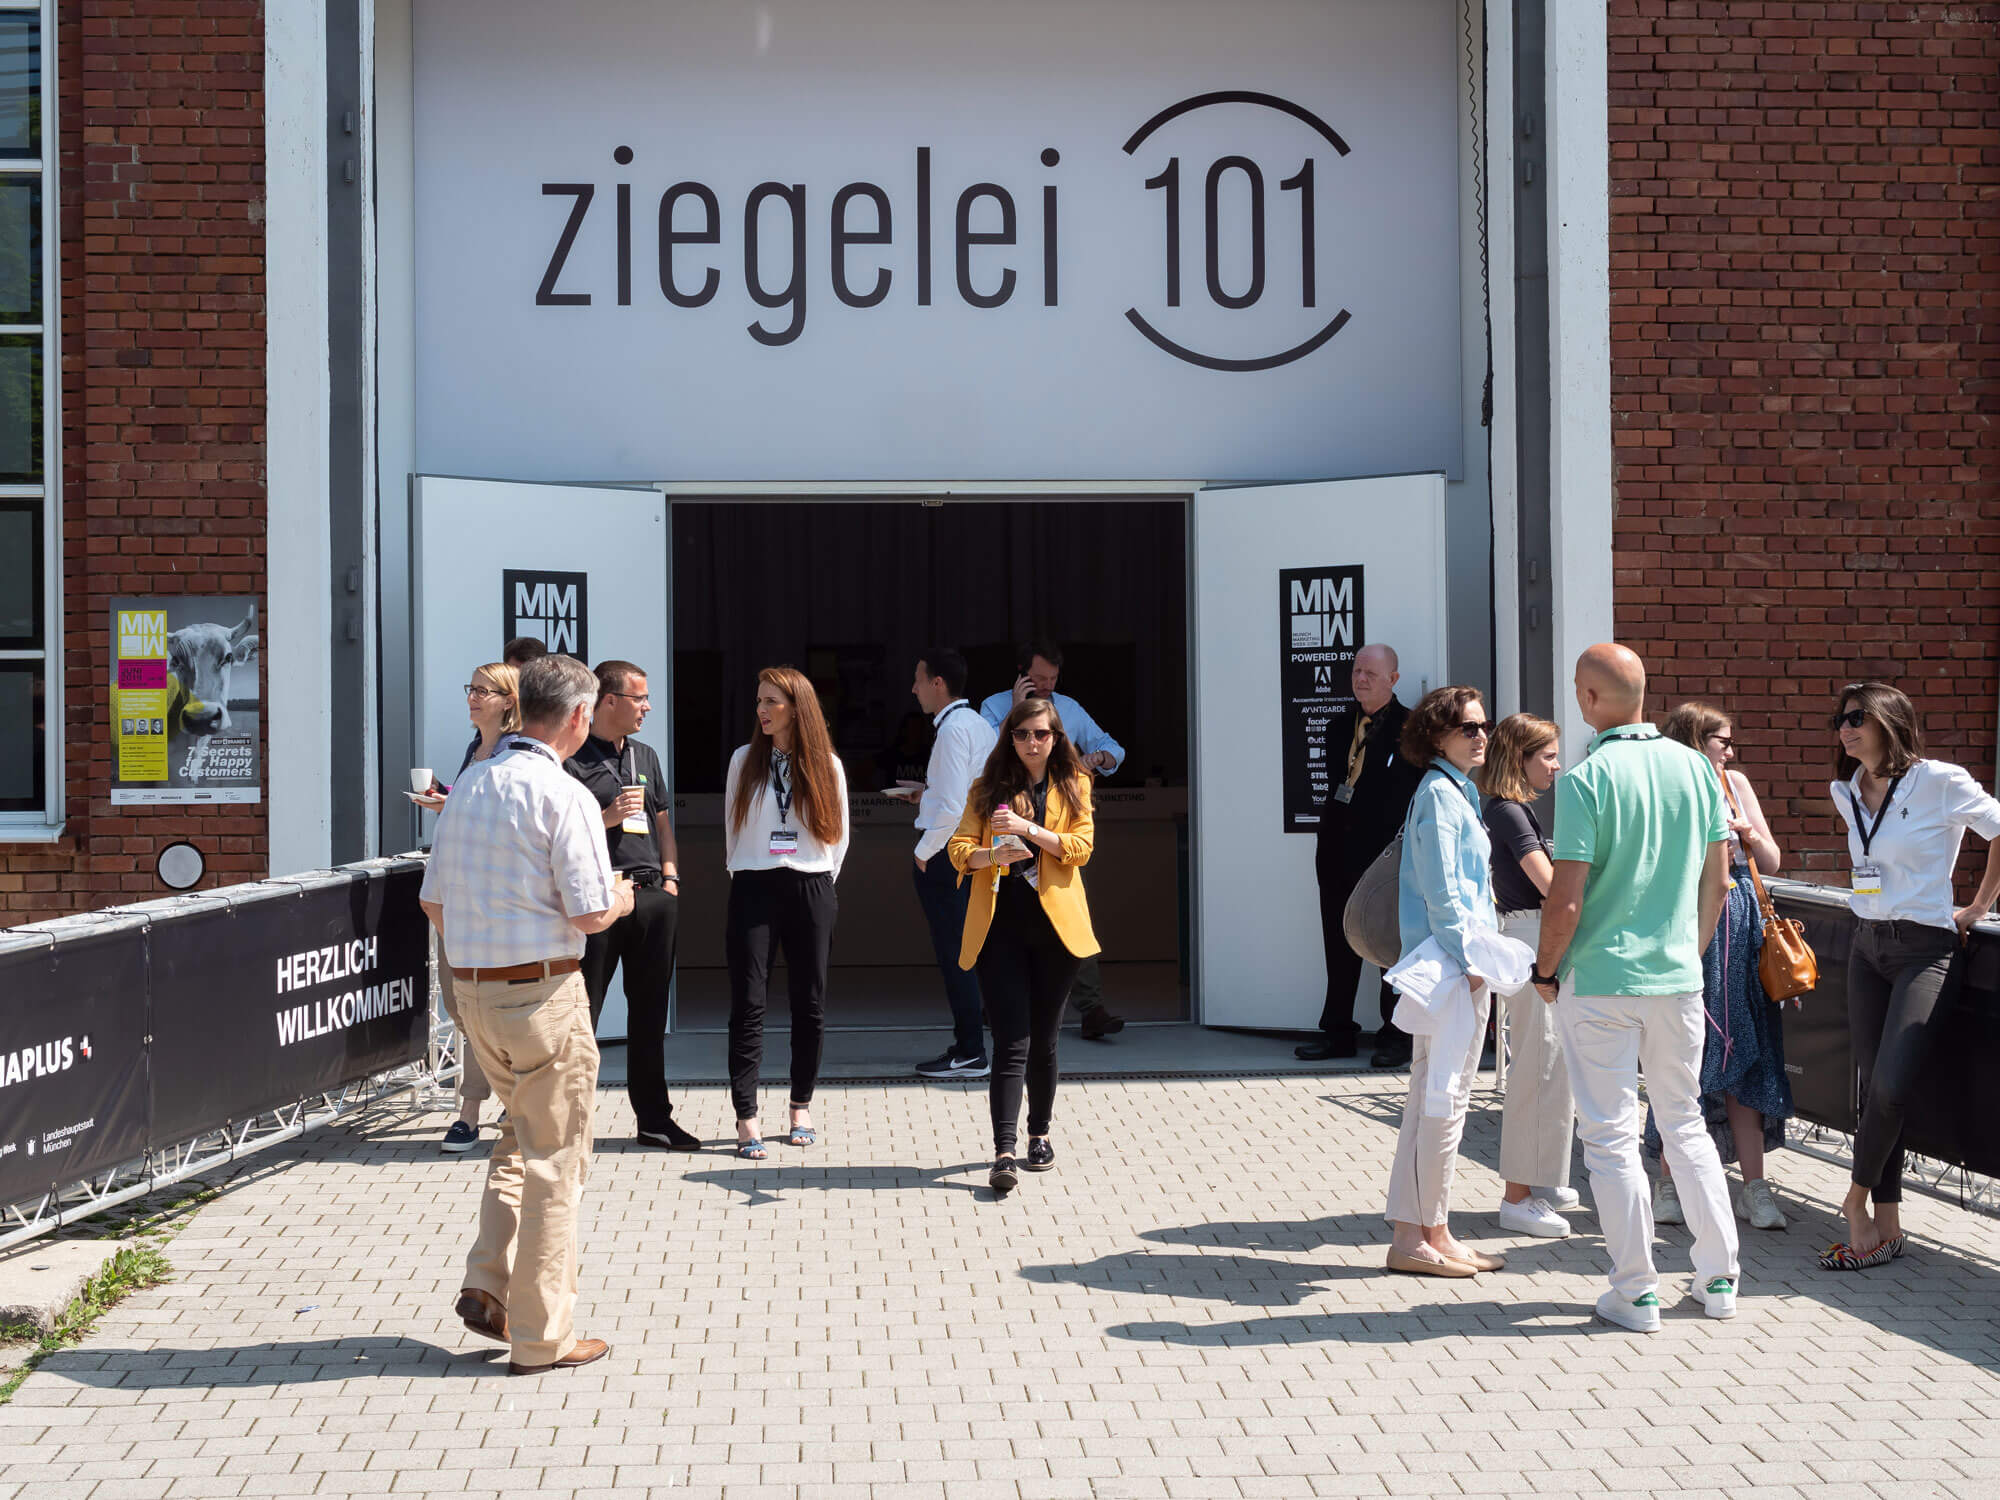 ziegelei101 outer view event entrance gate